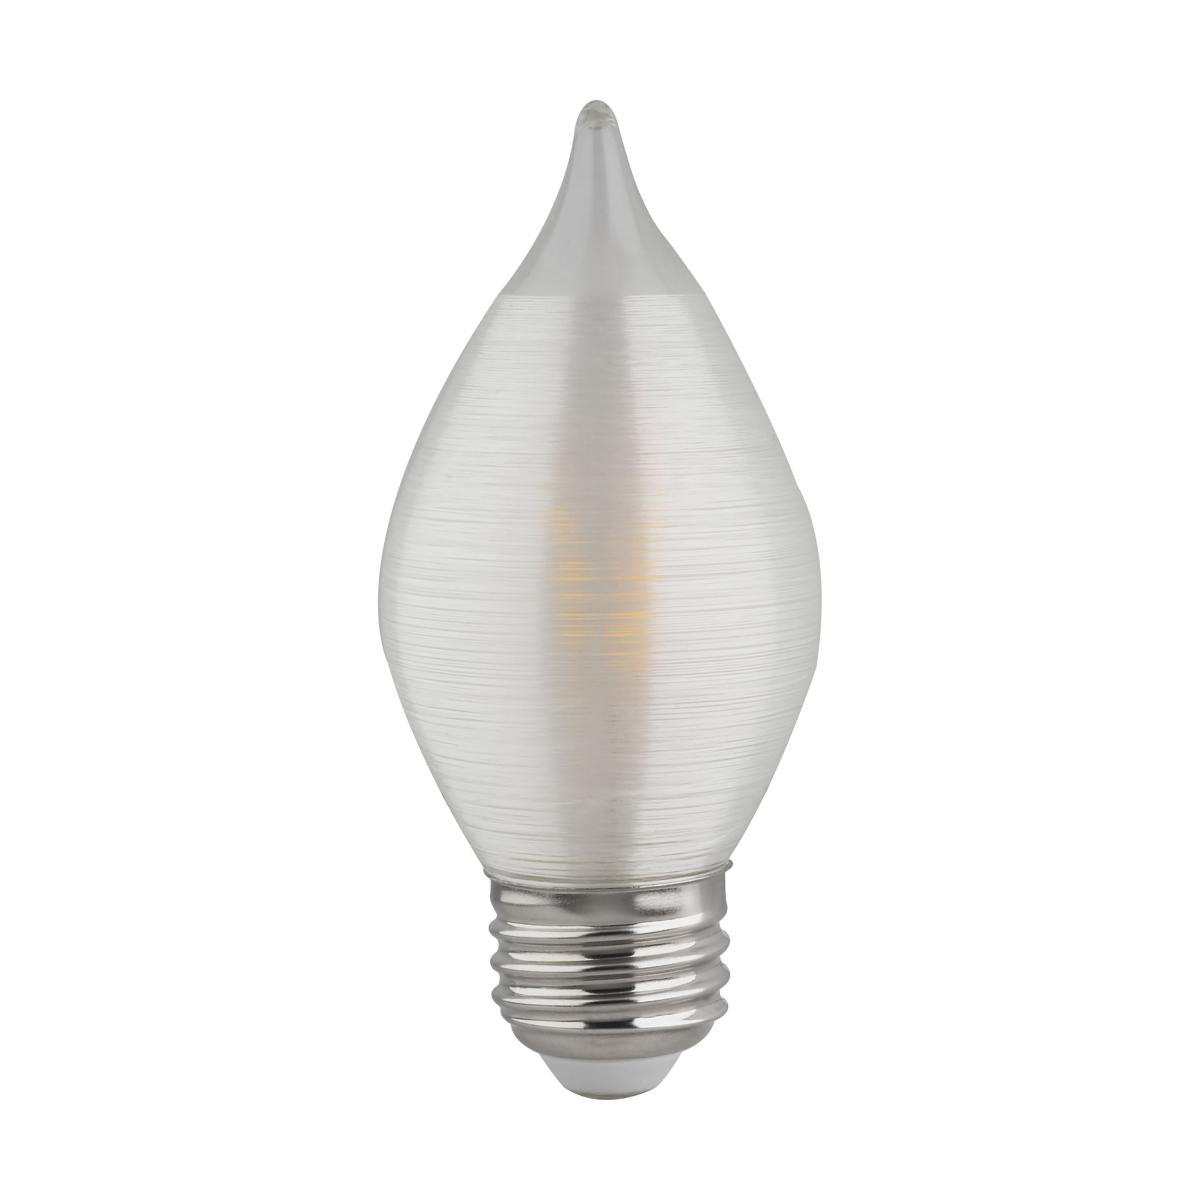 Replacement for Satco S2768 40W F15 120V E26 Medium Base 320 Lumen Incandescent White Dimmable - NOW LED S23413